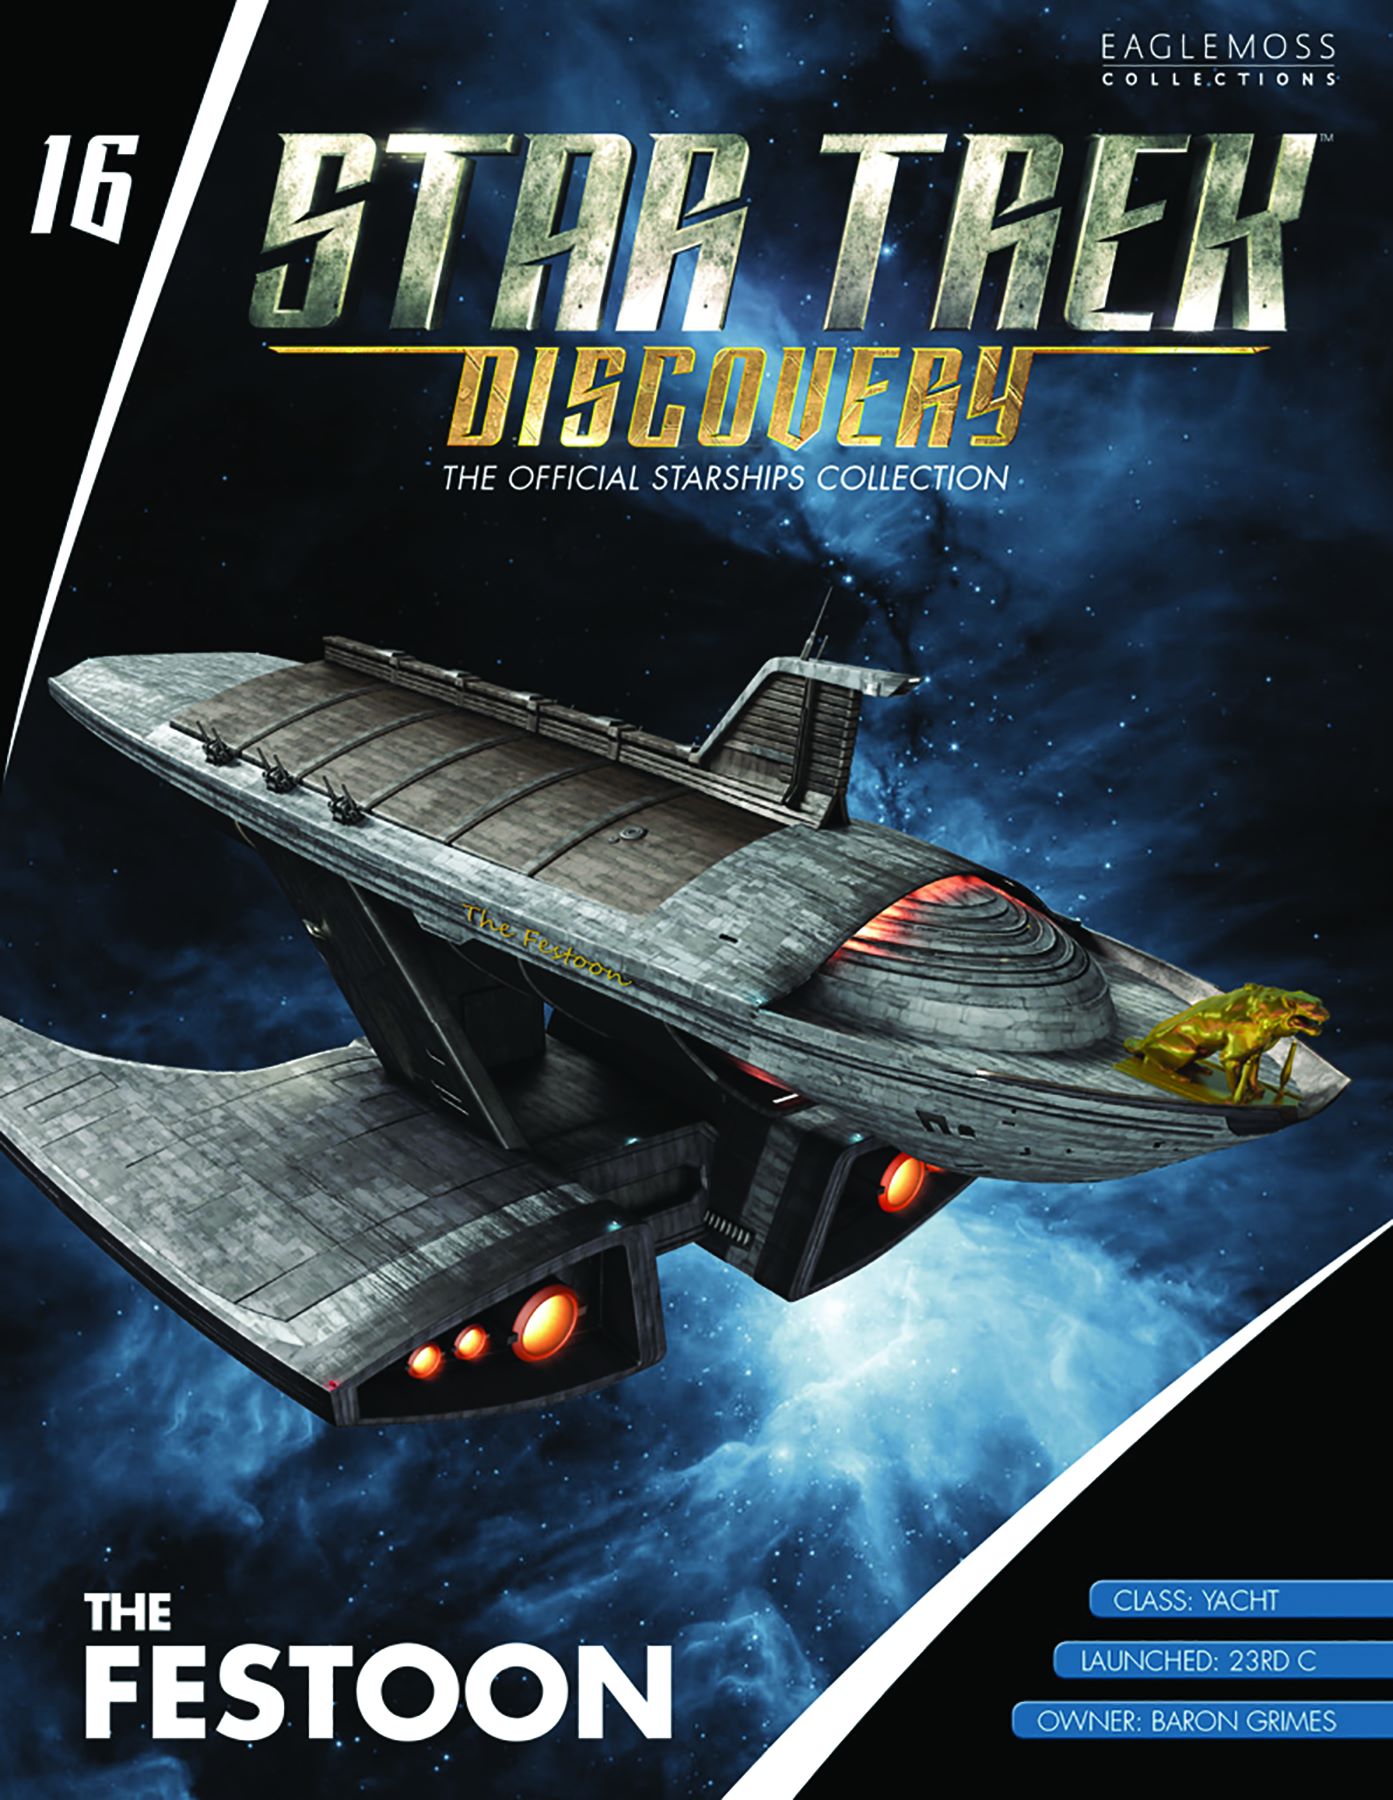 Star Trek: Discovery- The Official Starships Collection #16.jpg